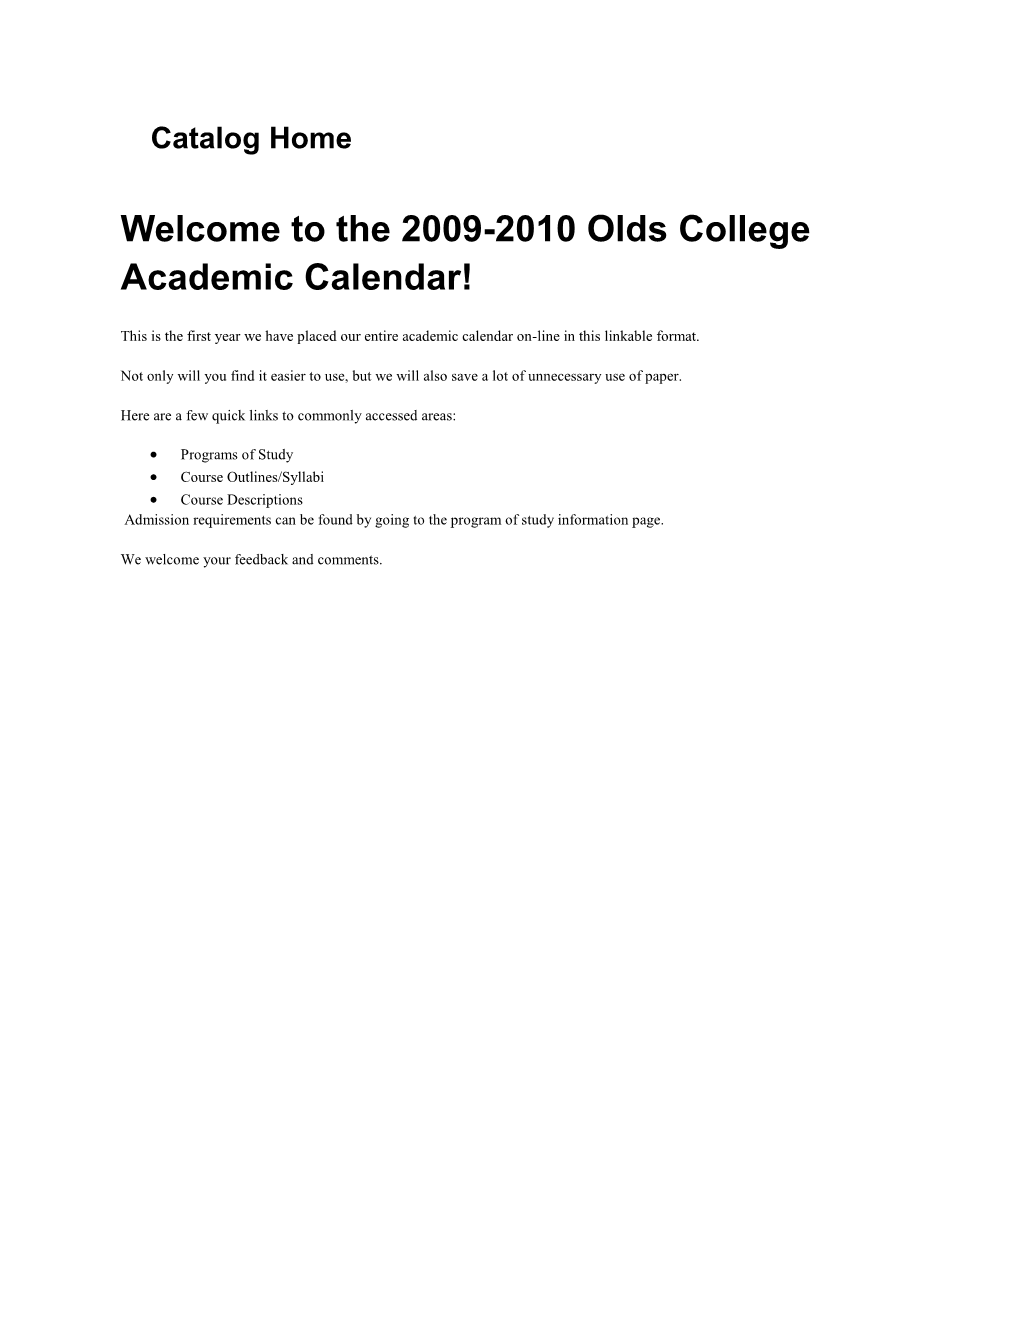 Welcome to the 2009-2010 Olds College Academic Calendar!